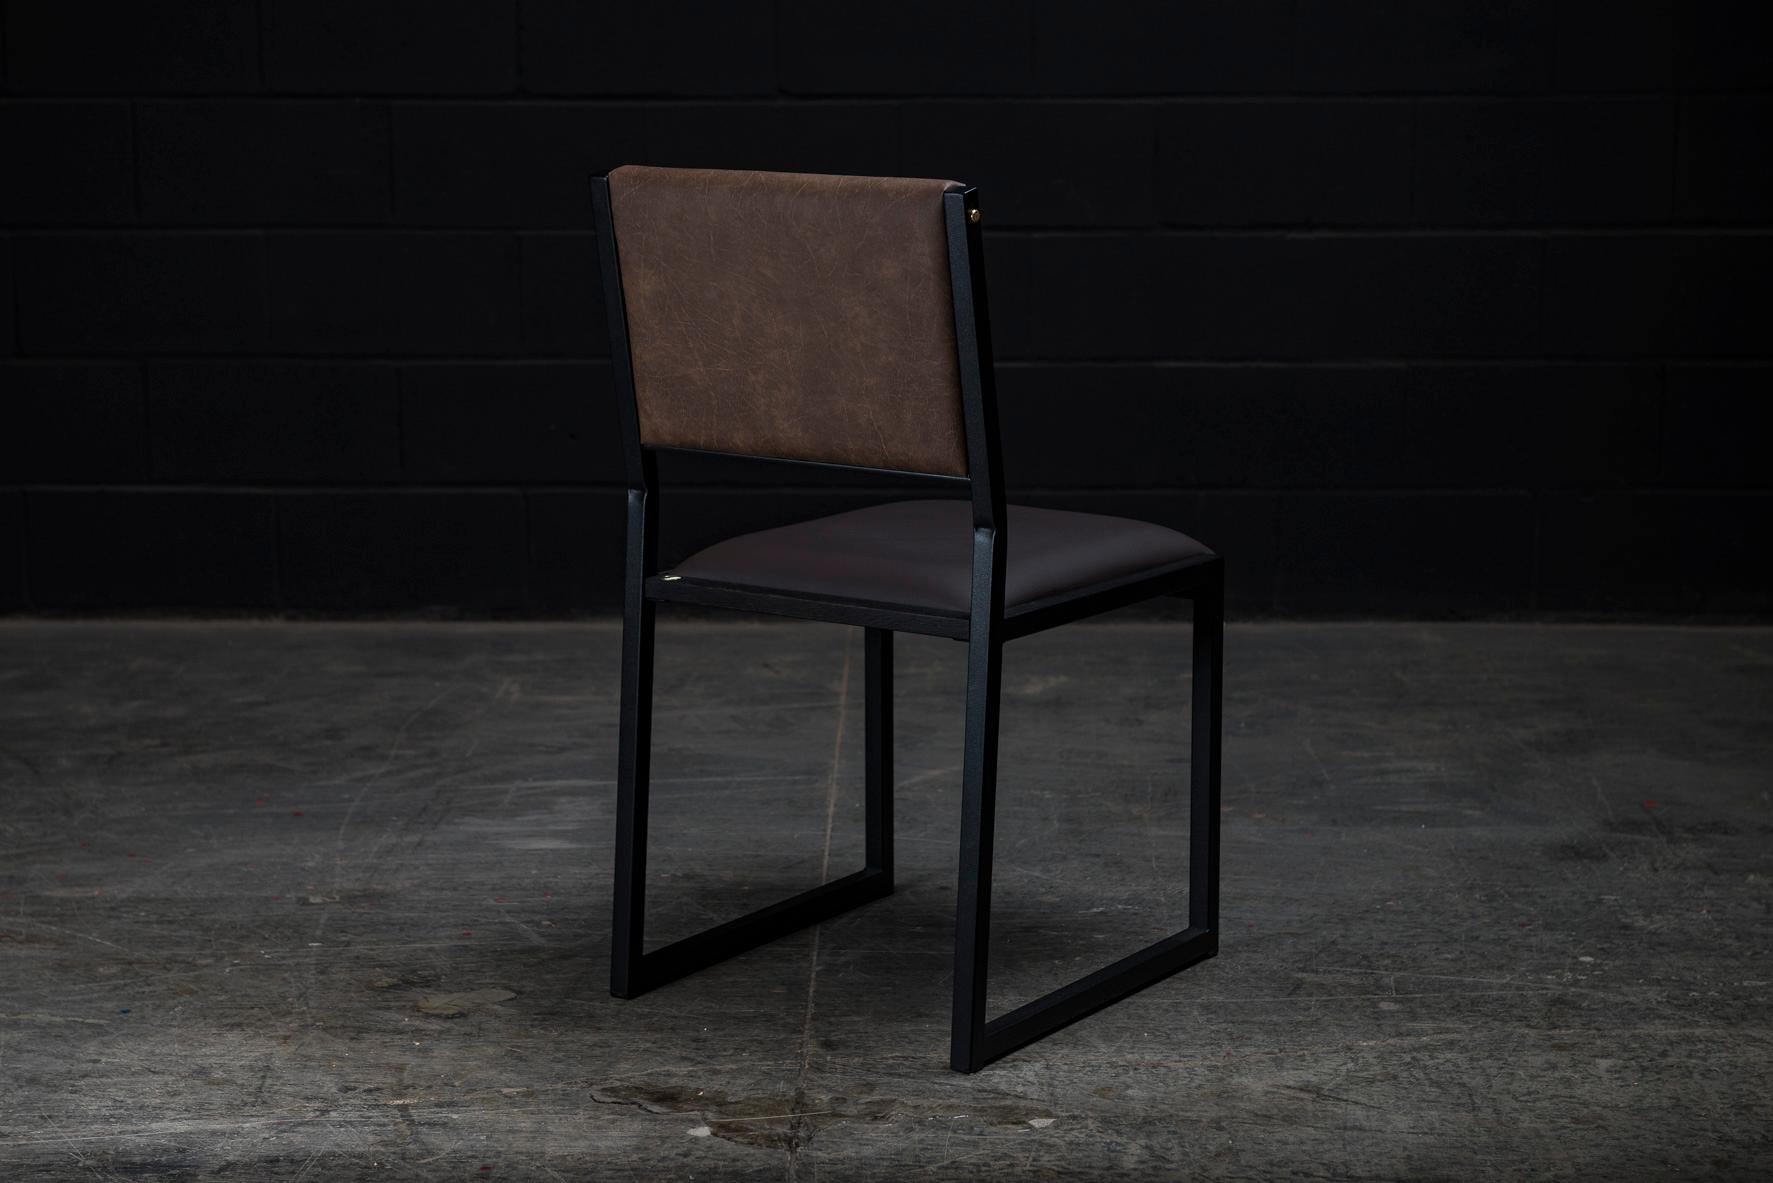 Contemporary Shaker Modern Chair by Ambrozia, Solid Wood, Black Steel, Espresso Vinyl   For Sale